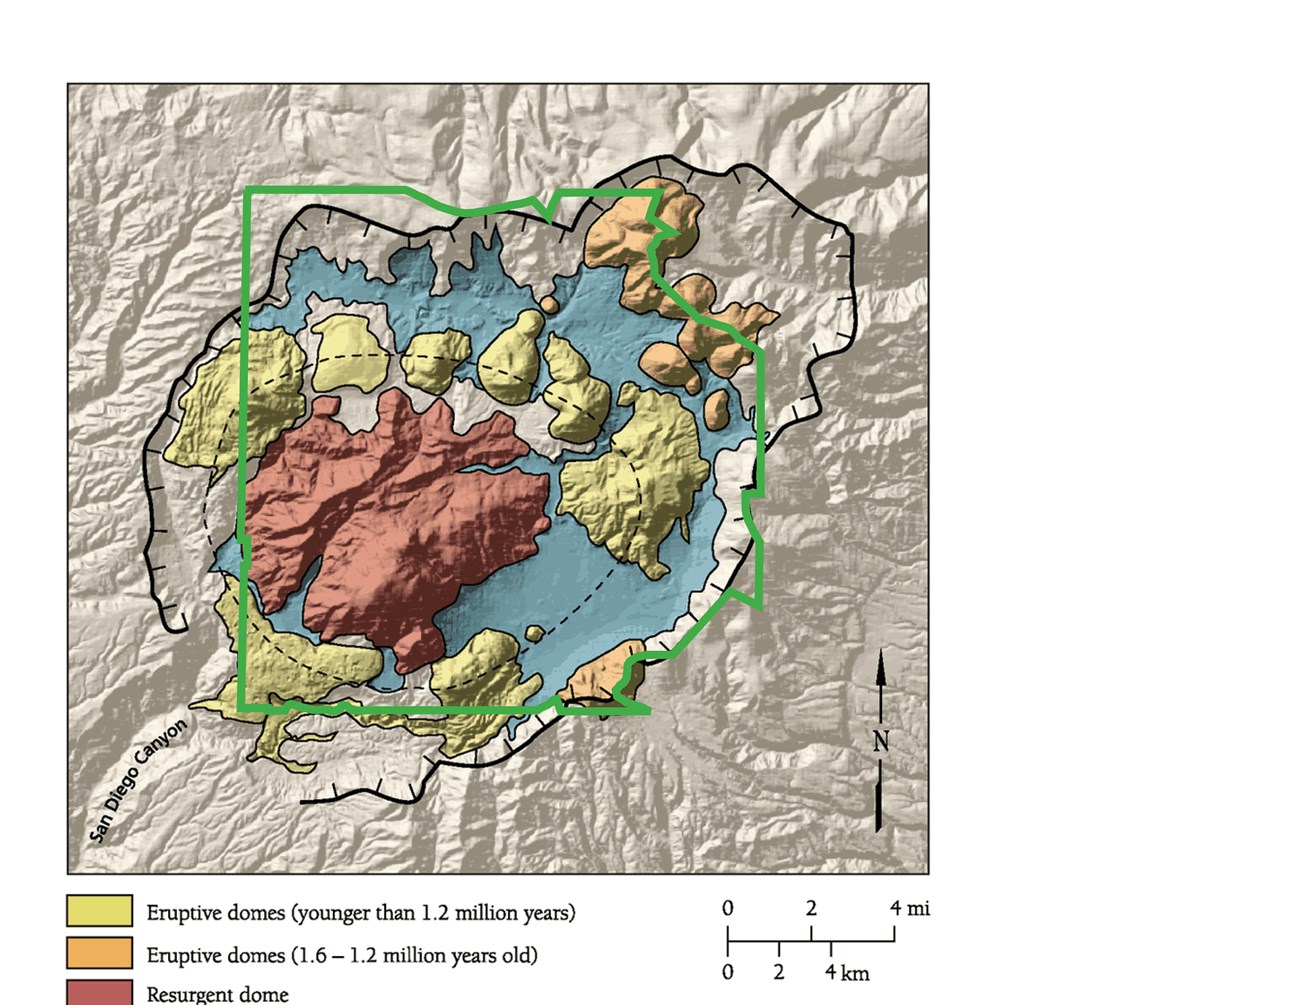 map of a volcanic crater with shaded relief and colored volcanic features and a park boundary line for valles caldera national monument